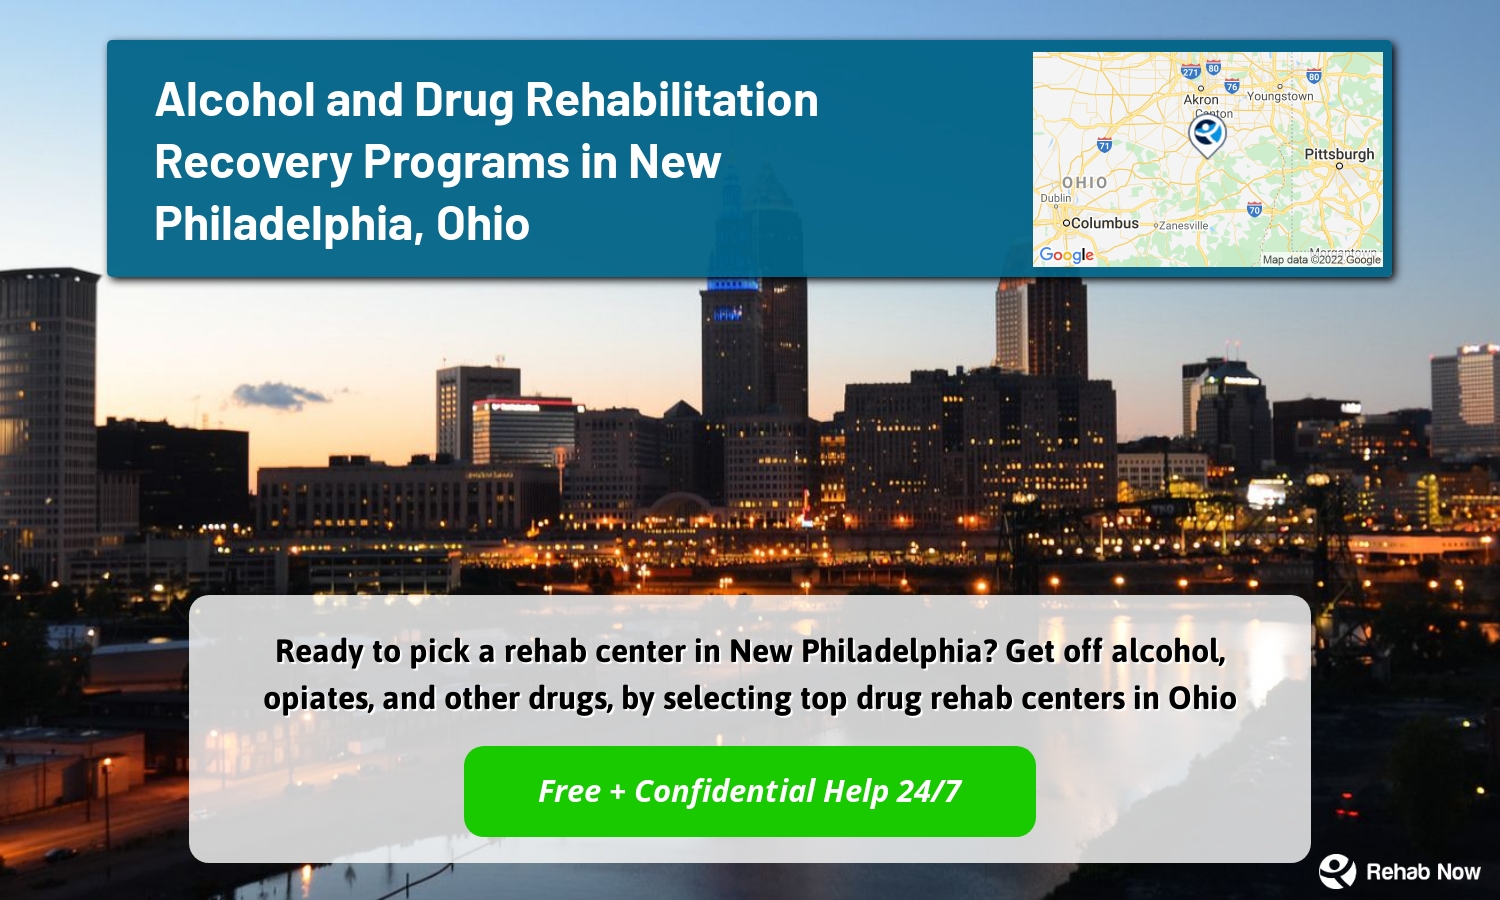 Ready to pick a rehab center in New Philadelphia? Get off alcohol, opiates, and other drugs, by selecting top drug rehab centers in Ohio